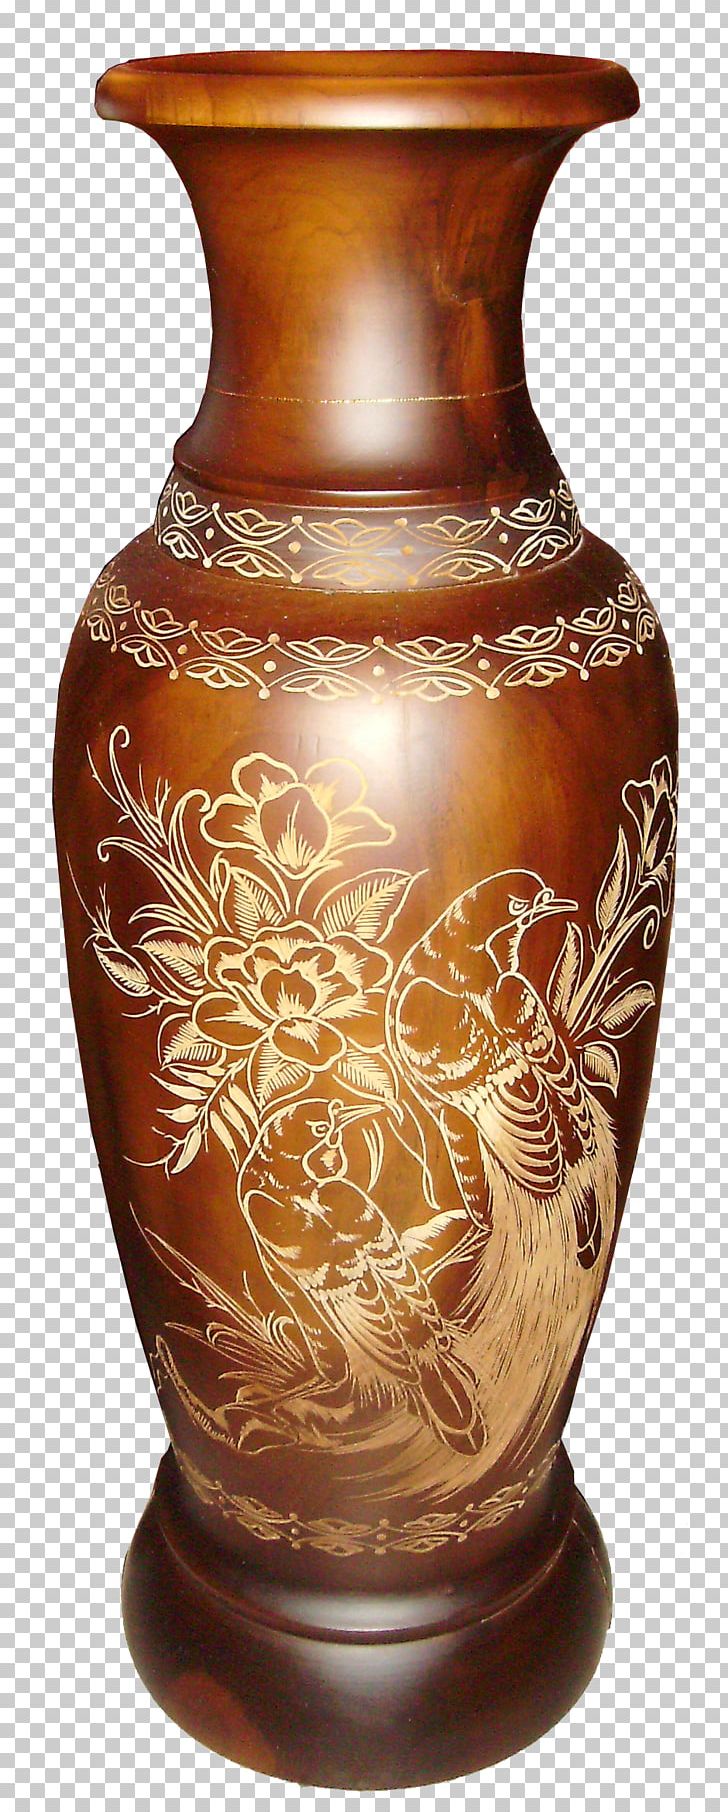 Vase Table Ceramic Chair Interior Design Services PNG, Clipart, Armoires Wardrobes, Artifact, Ceramic, Chair, Flowers Free PNG Download